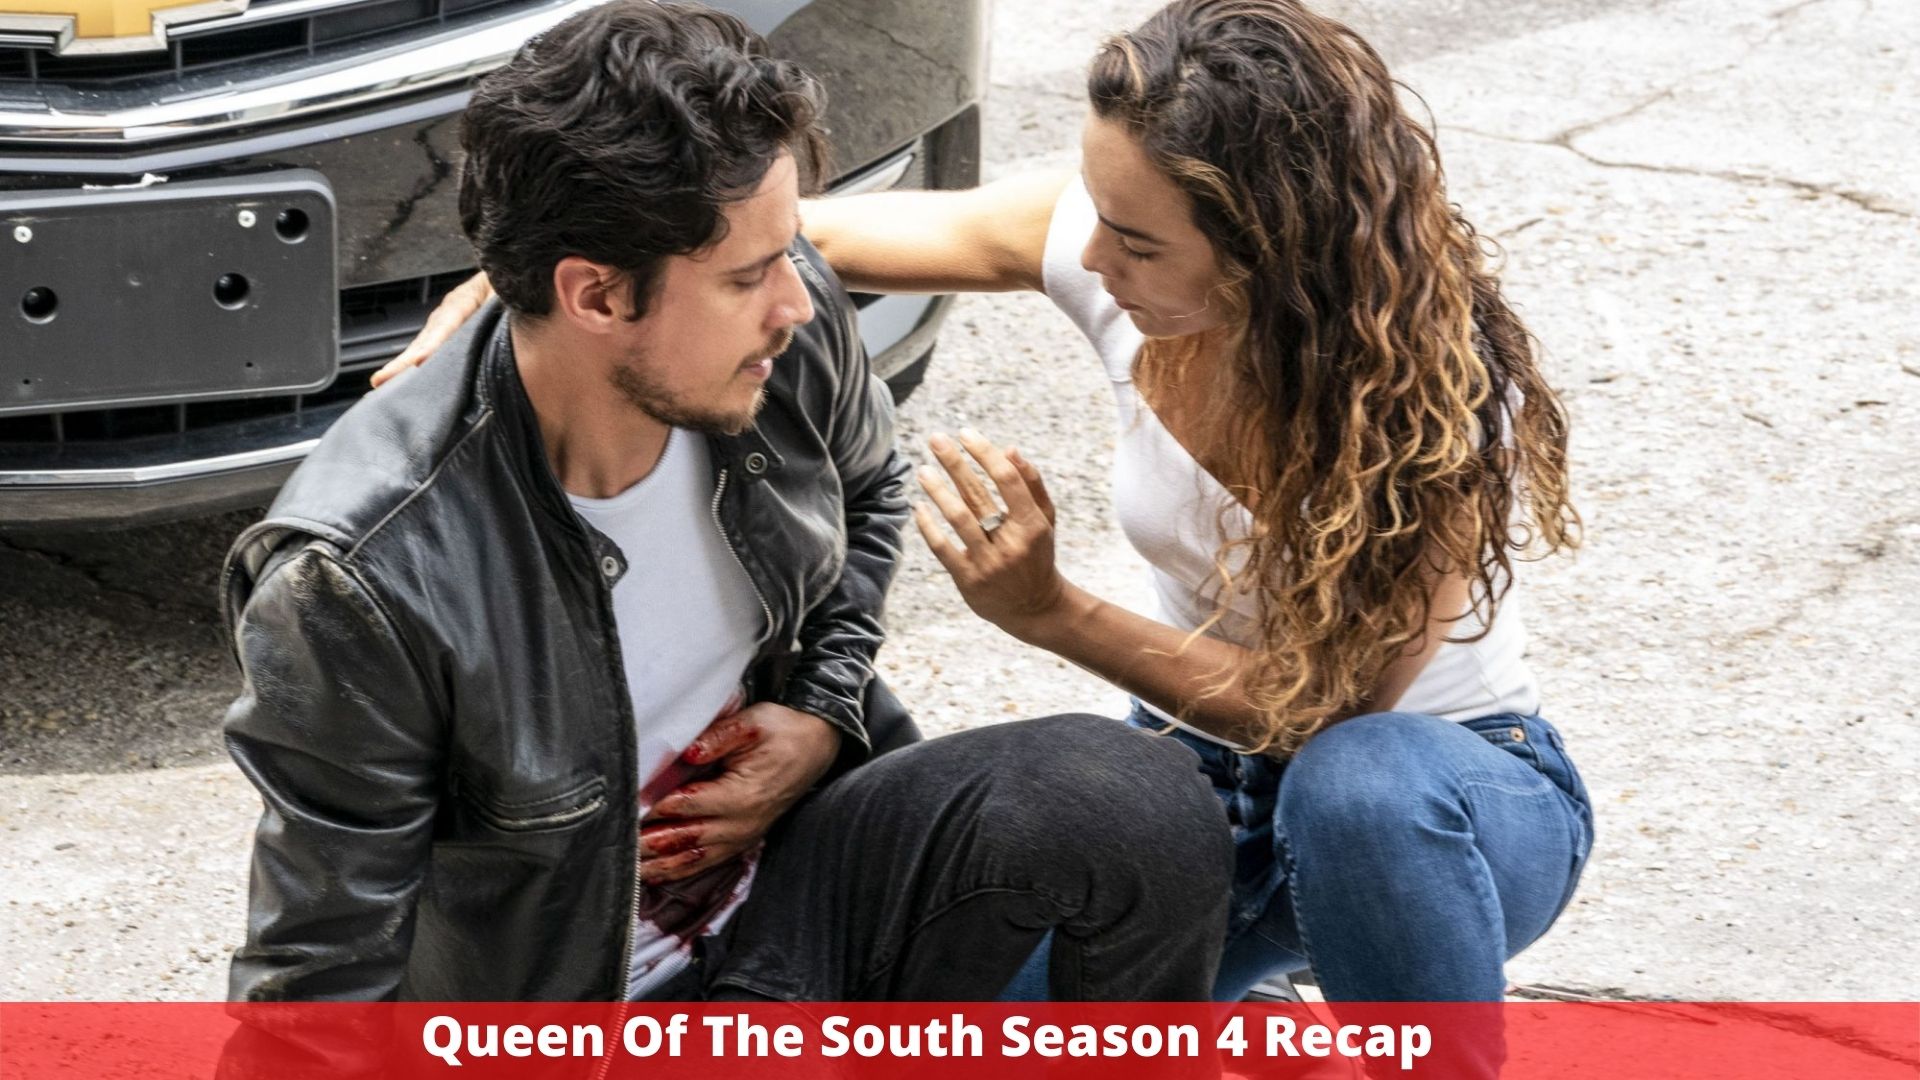 Queen Of The South Season 4 Recap - Everything We Know!